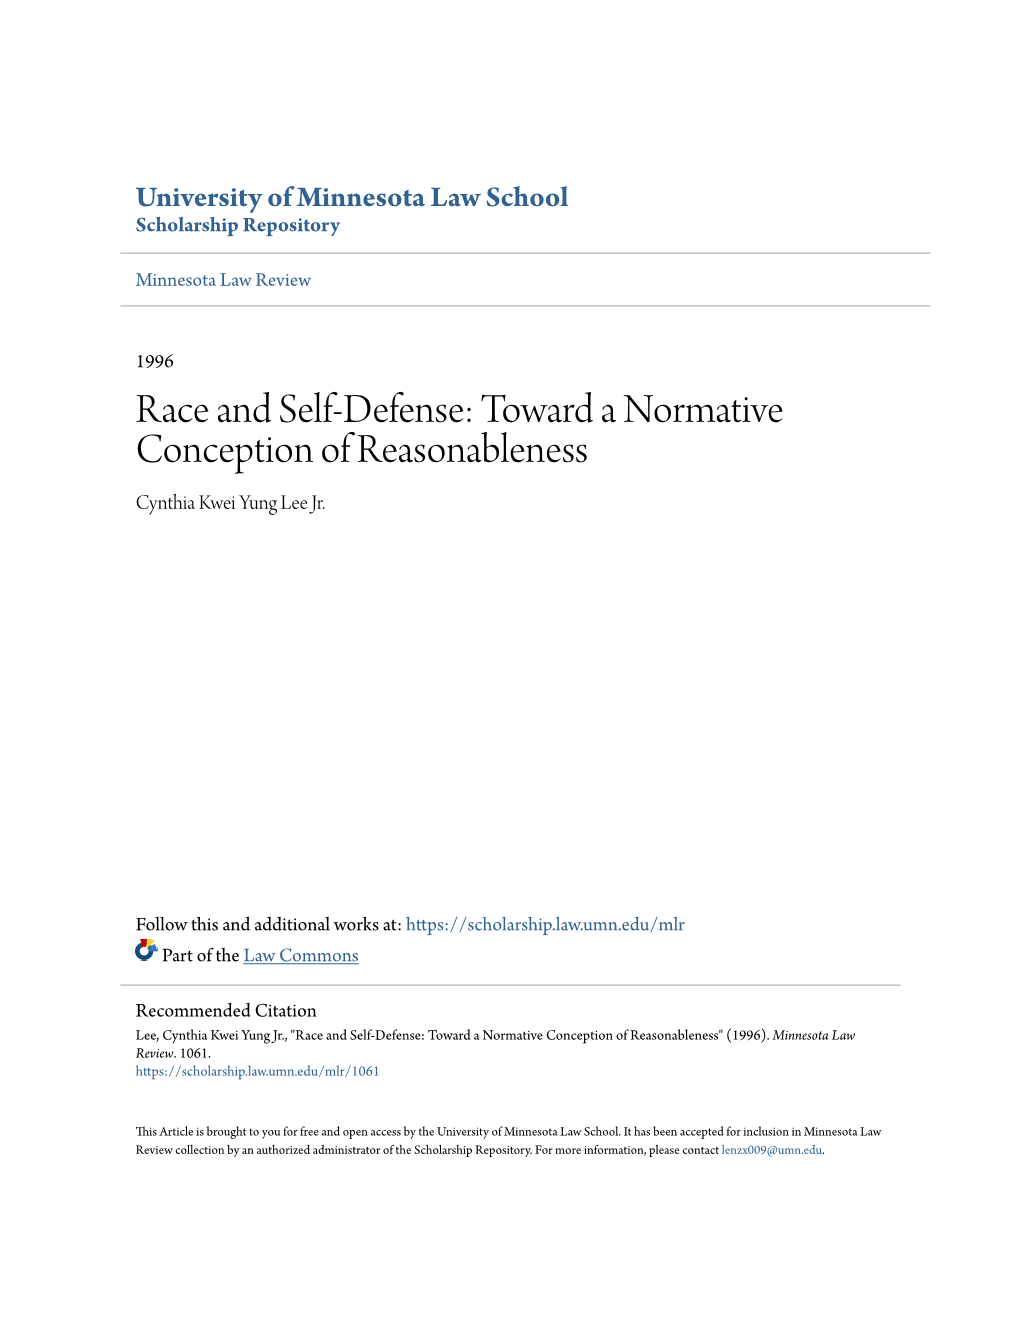 Race and Self-Defense: Toward a Normative Conception of Reasonableness Cynthia Kwei Yung Lee Jr